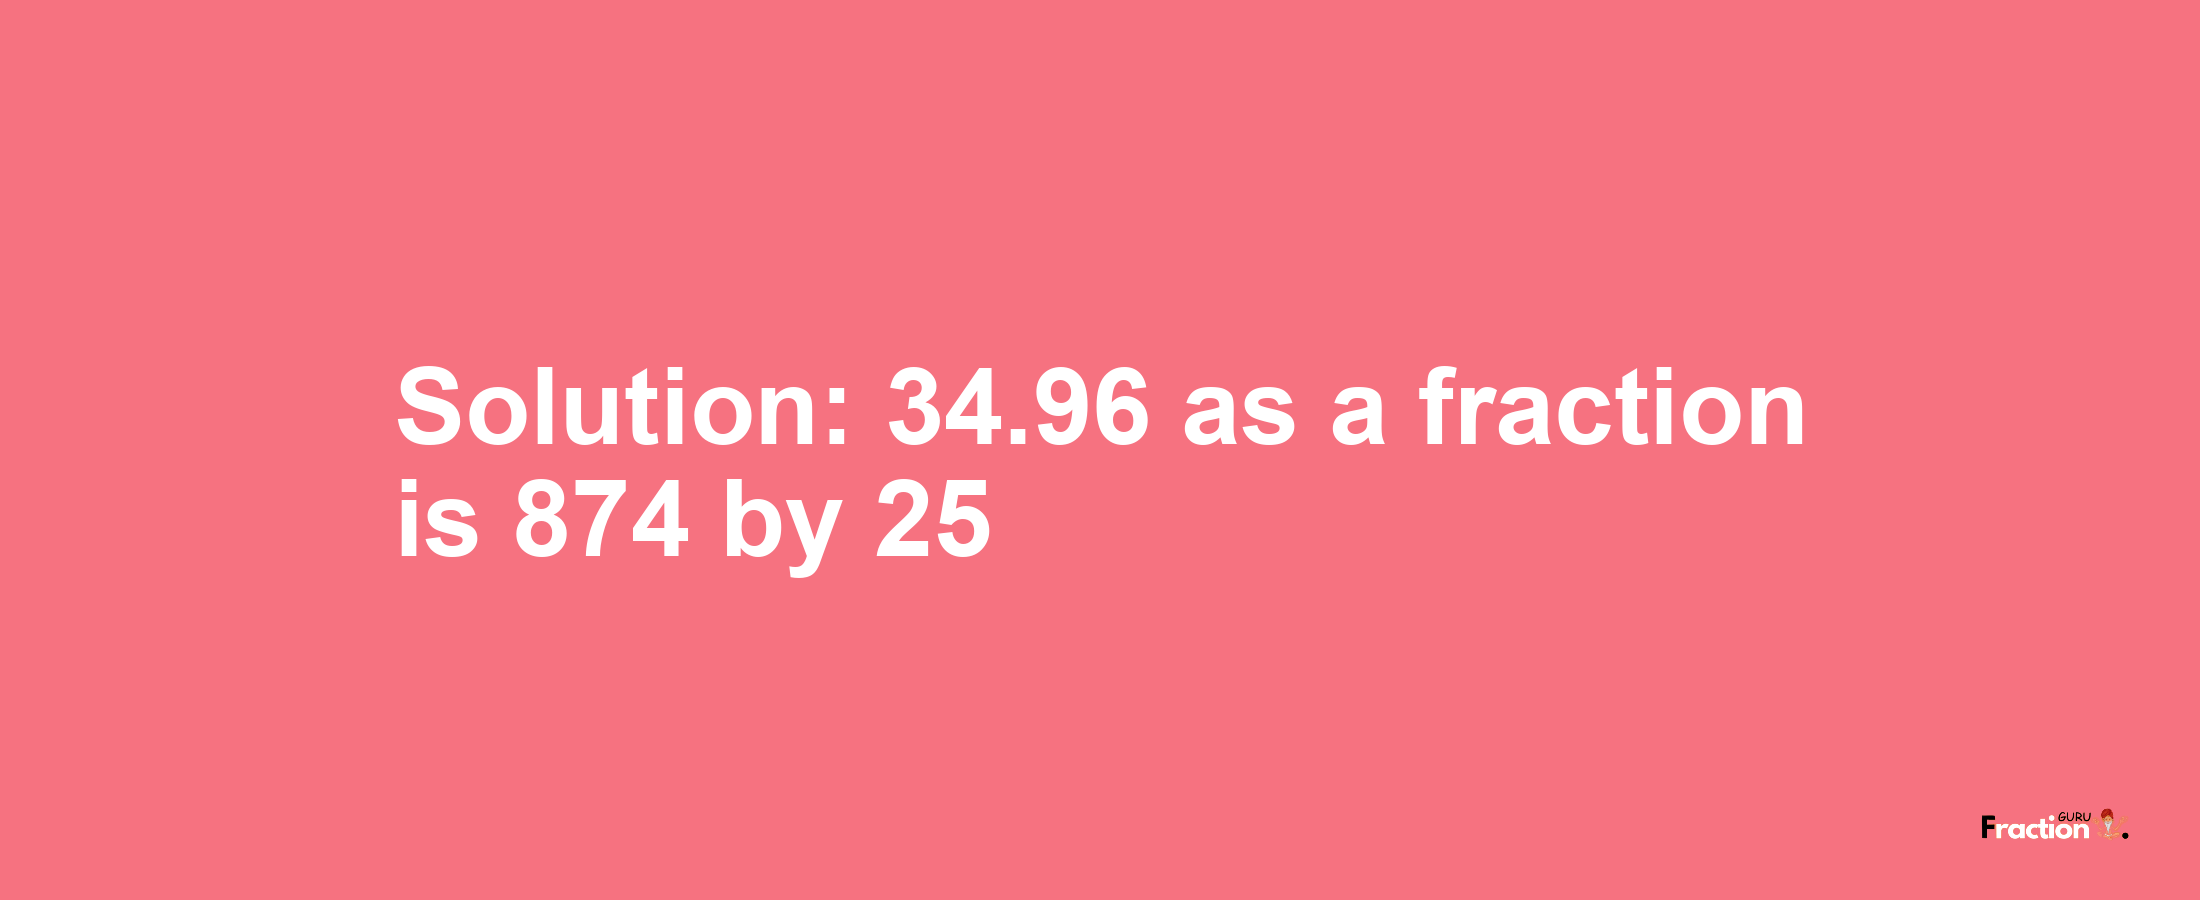 Solution:34.96 as a fraction is 874/25